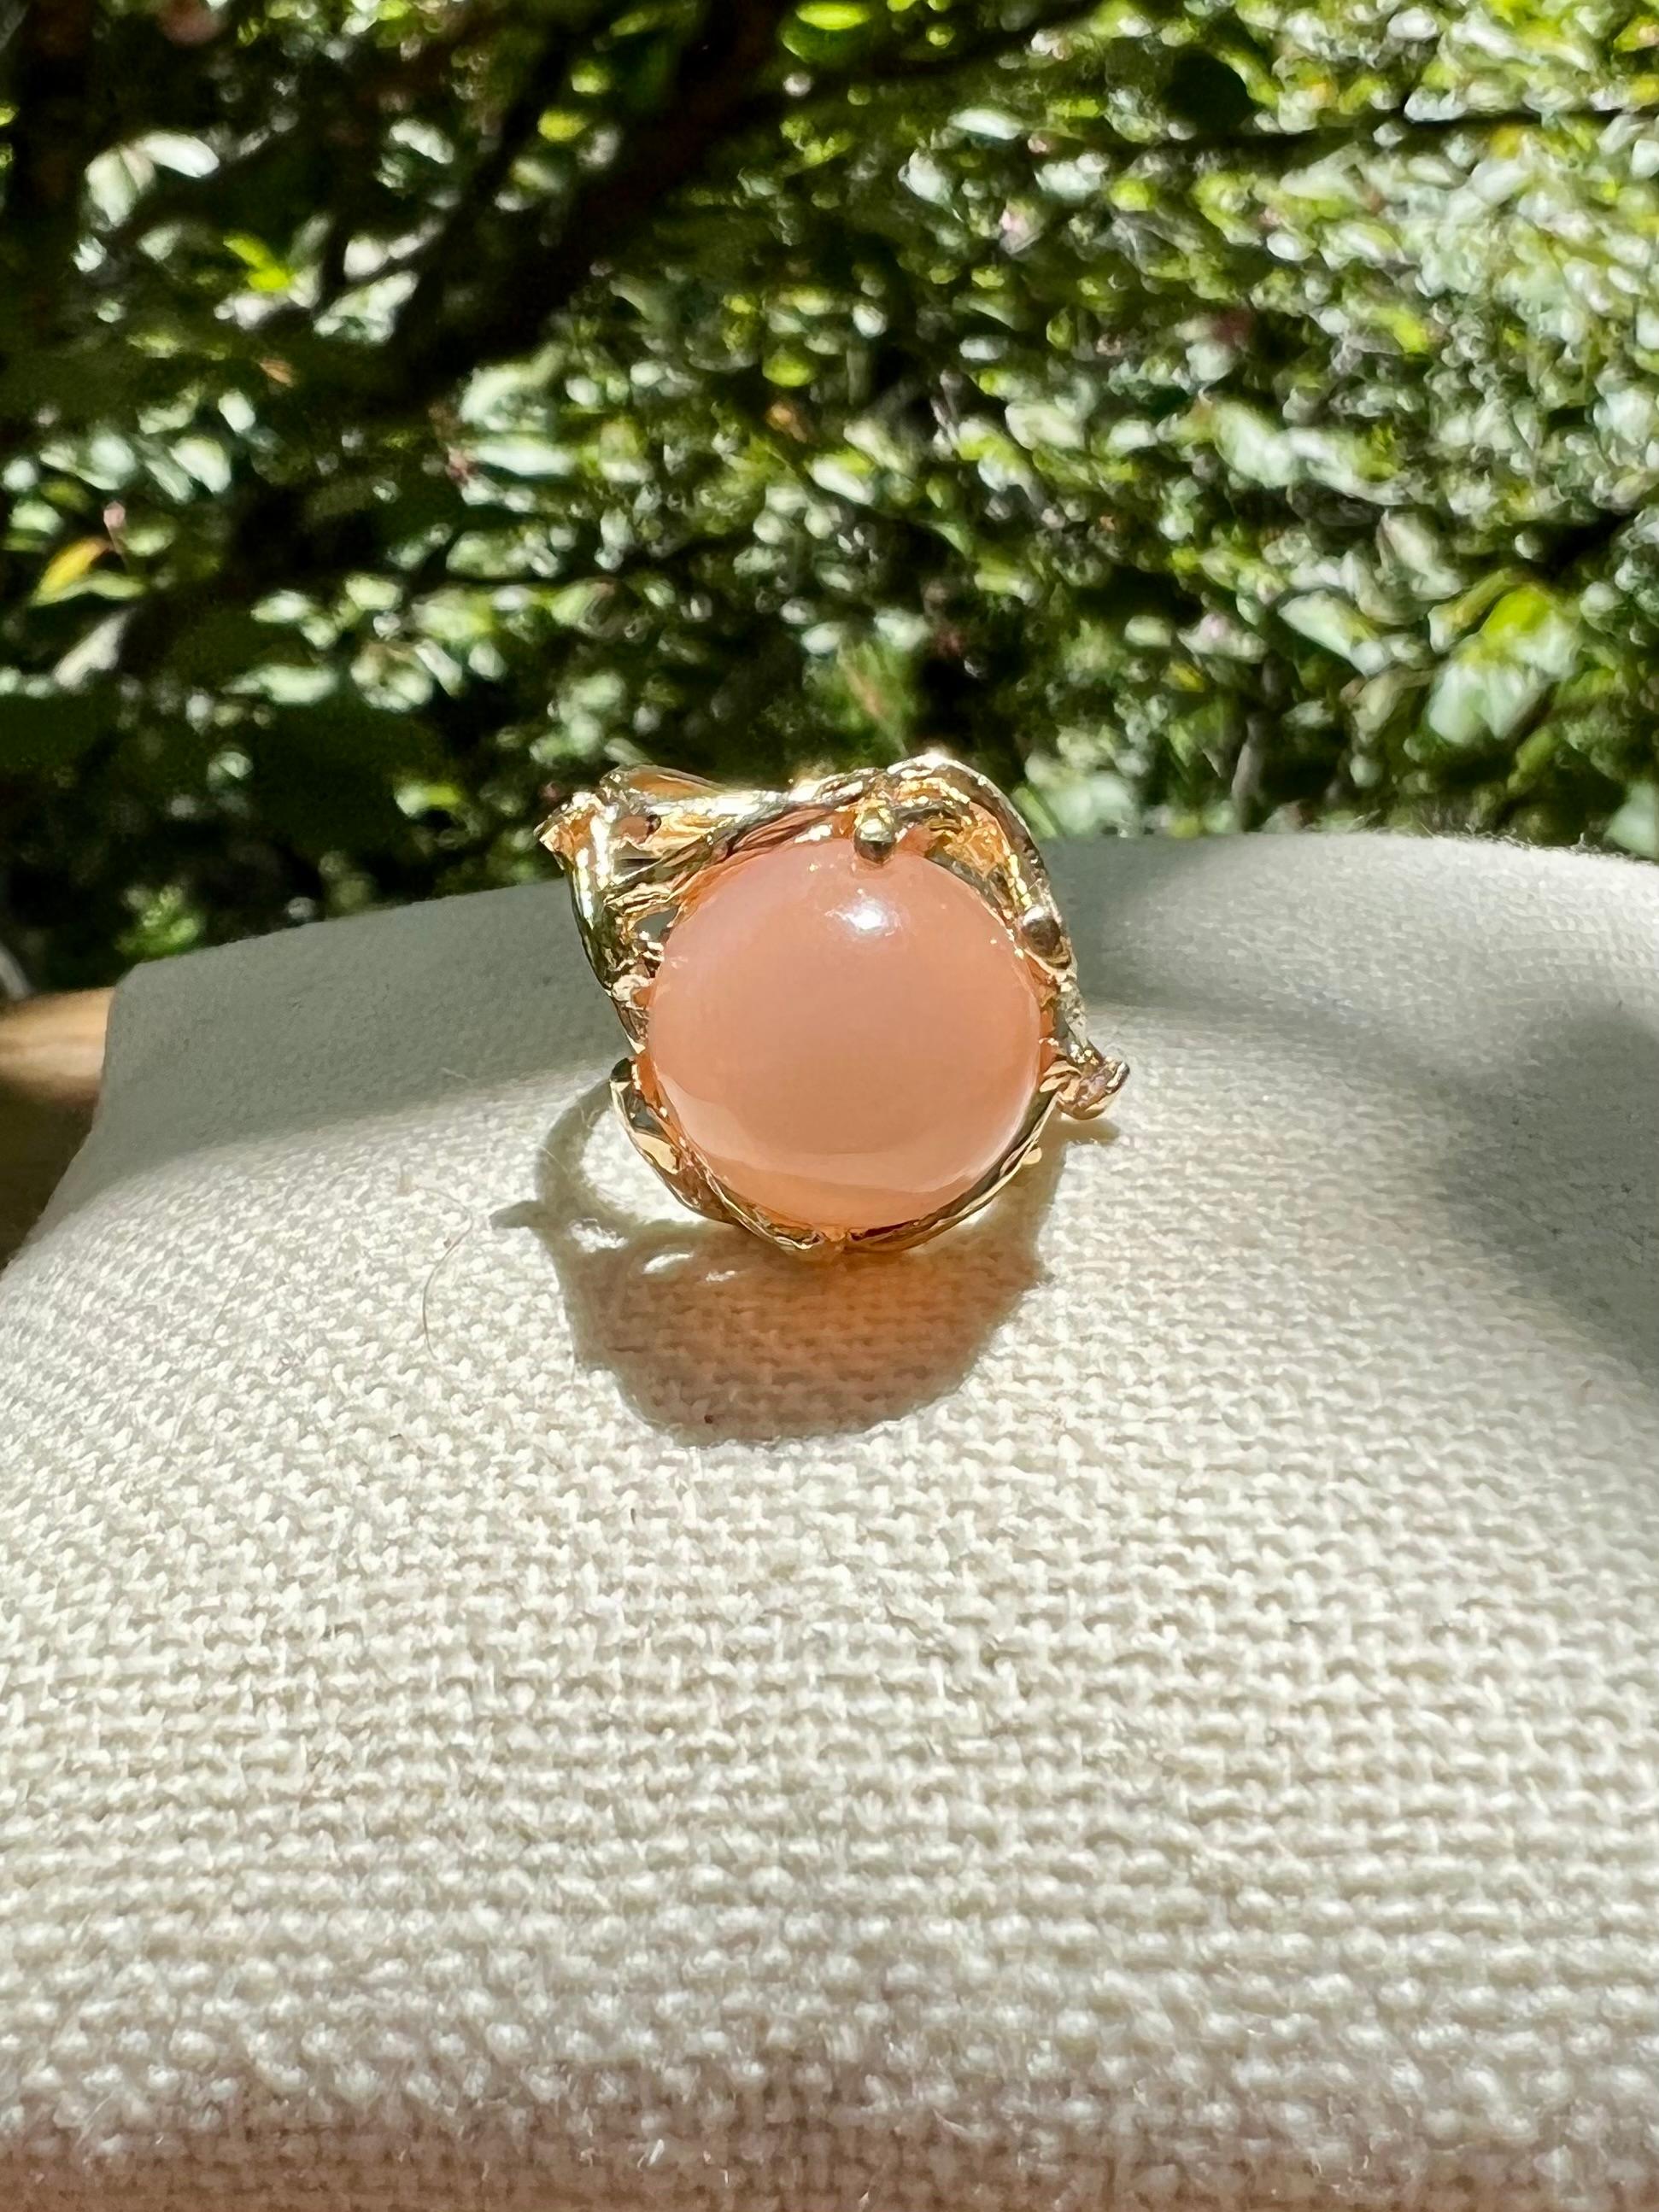 One 14-karat yellow gold ring set with one 11.86 x 11.86 x 8.5mm salmon-colored moonstone set in a branch design setting.  The ring weighs 5.8 grams and is a finger size 5.  The ring can be resized.  Sizing is not included.  